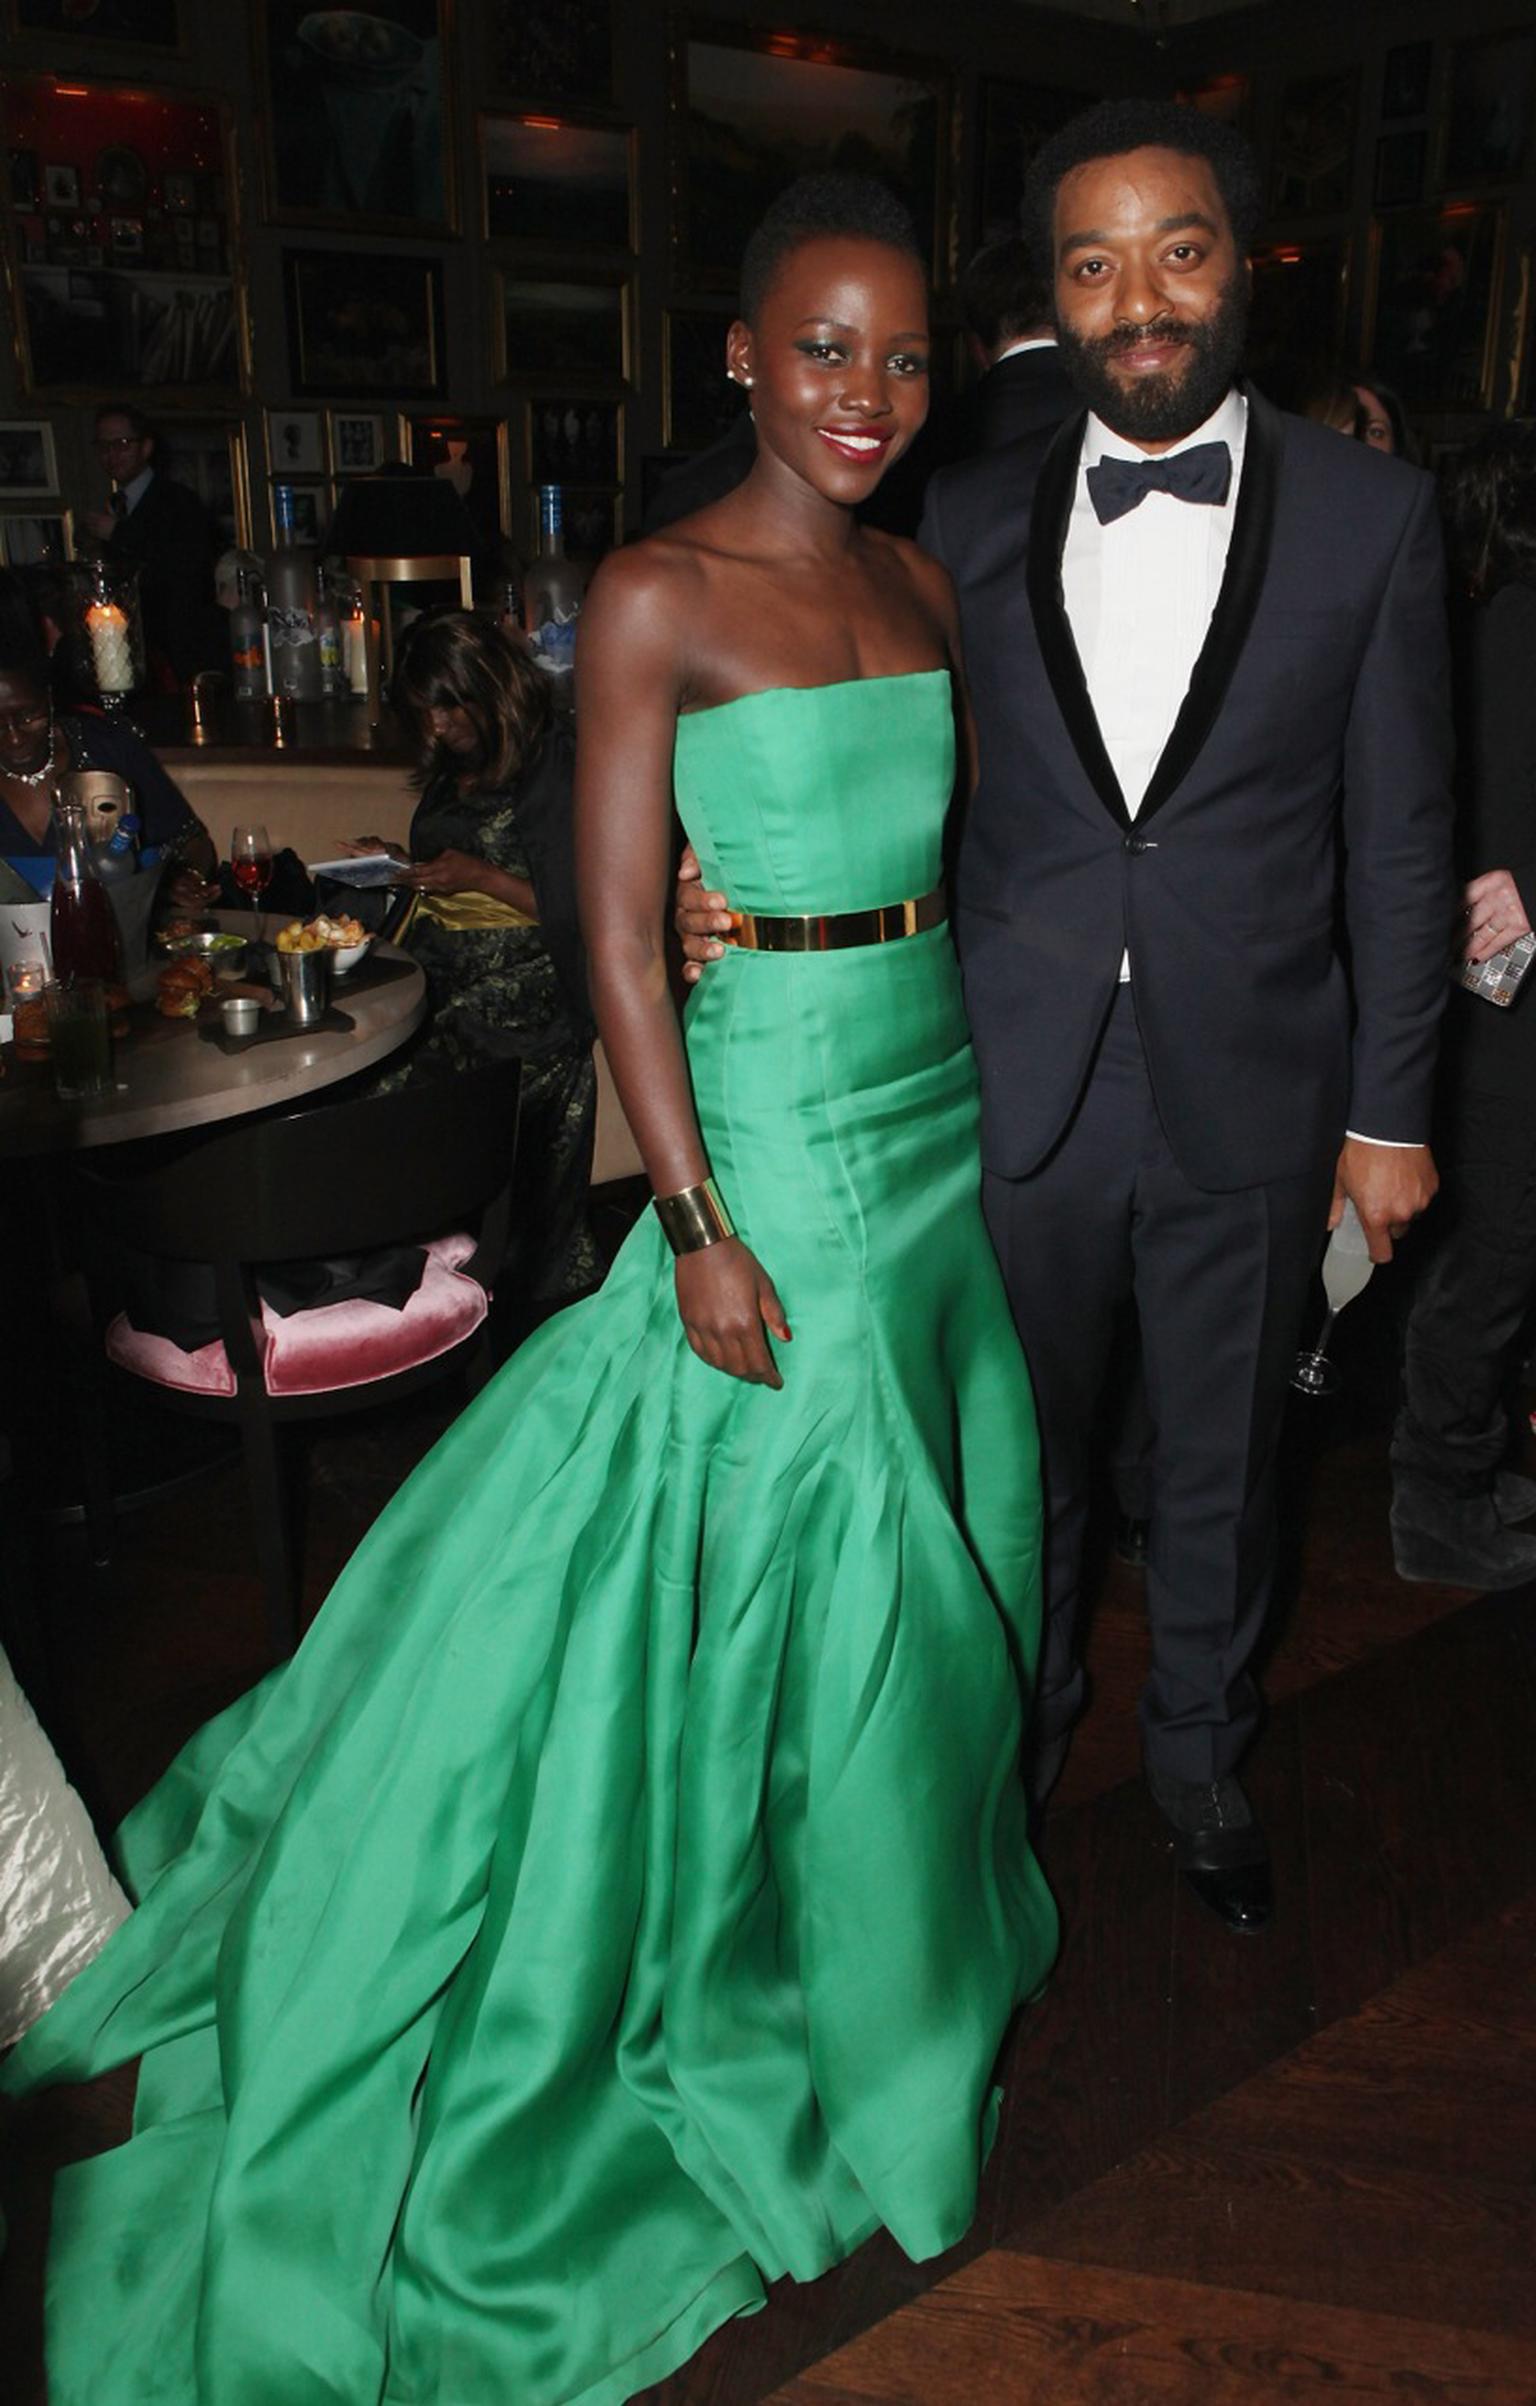 Lupita Nyong'o, BAFTA nominee for her role in '12 Years a Slave', wore an emerald green Dior dress accessorised with two Ana Khouri gold cuff bracelets